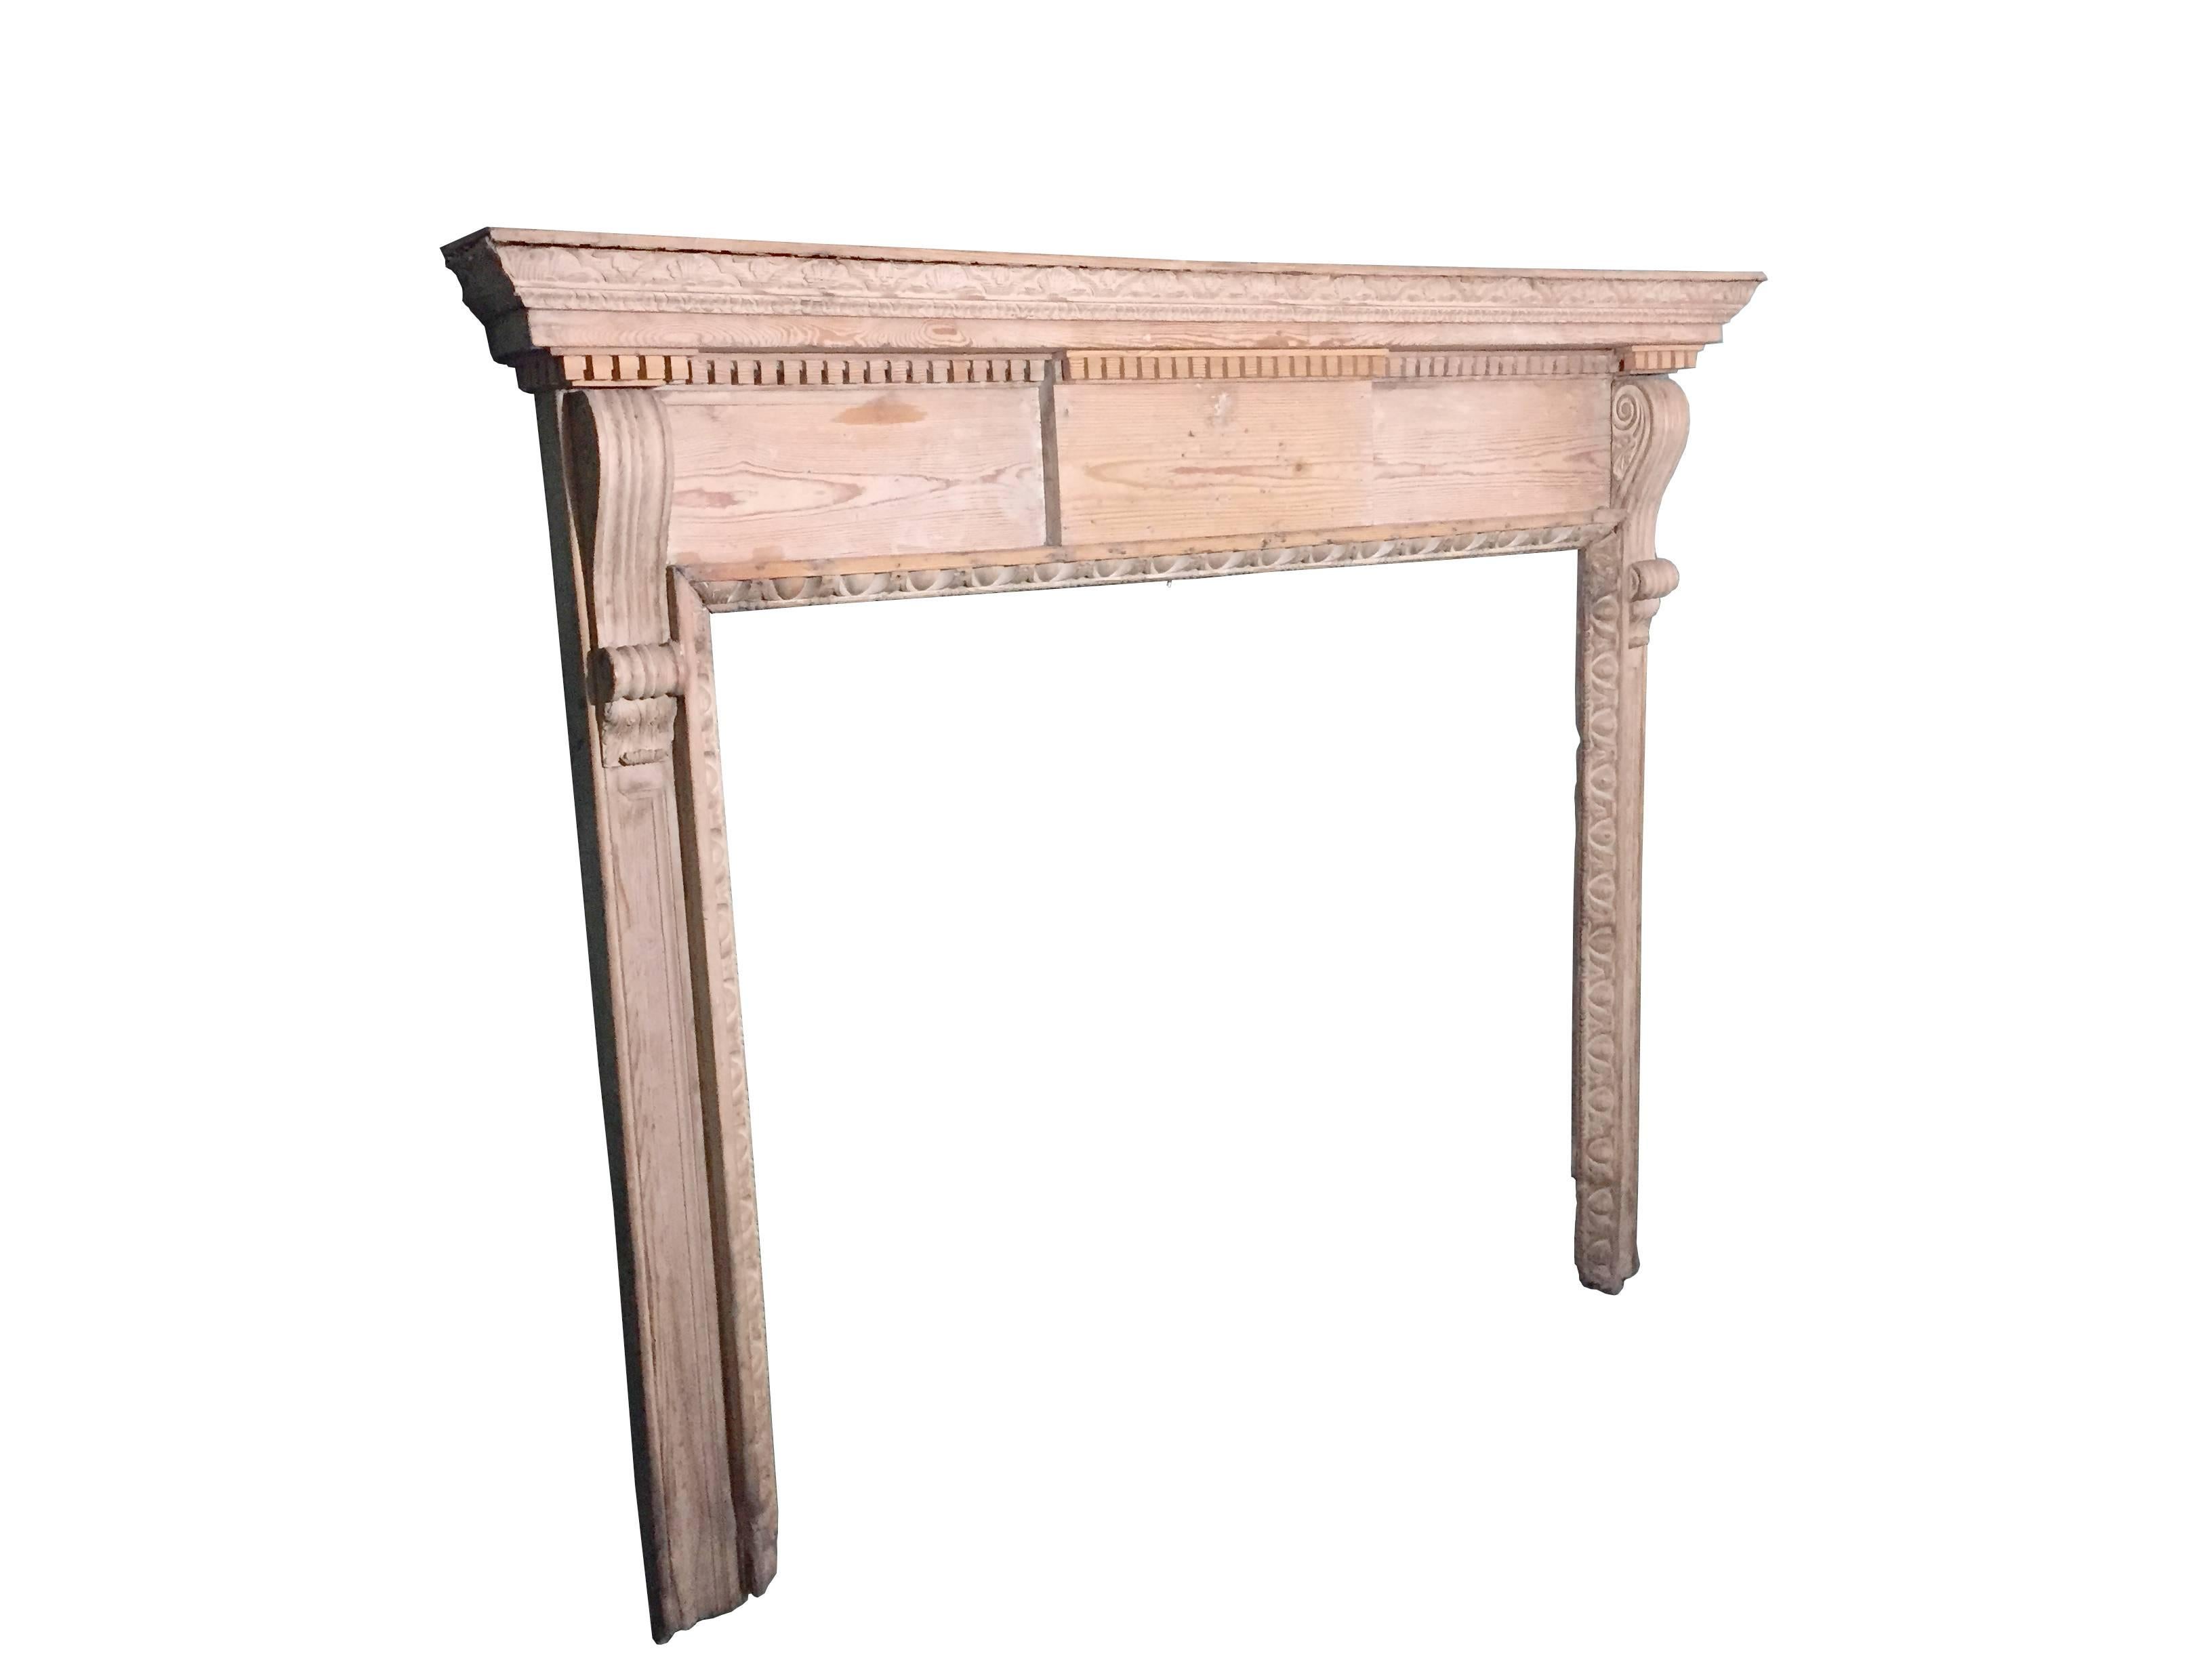 Antique period George II pinewood carved mantle with beautifully carved cornice above a dentilled carved molding. Flanked at each side with classical scrolls, finely carved. The opening has an egg and dart molding all finely carved. This